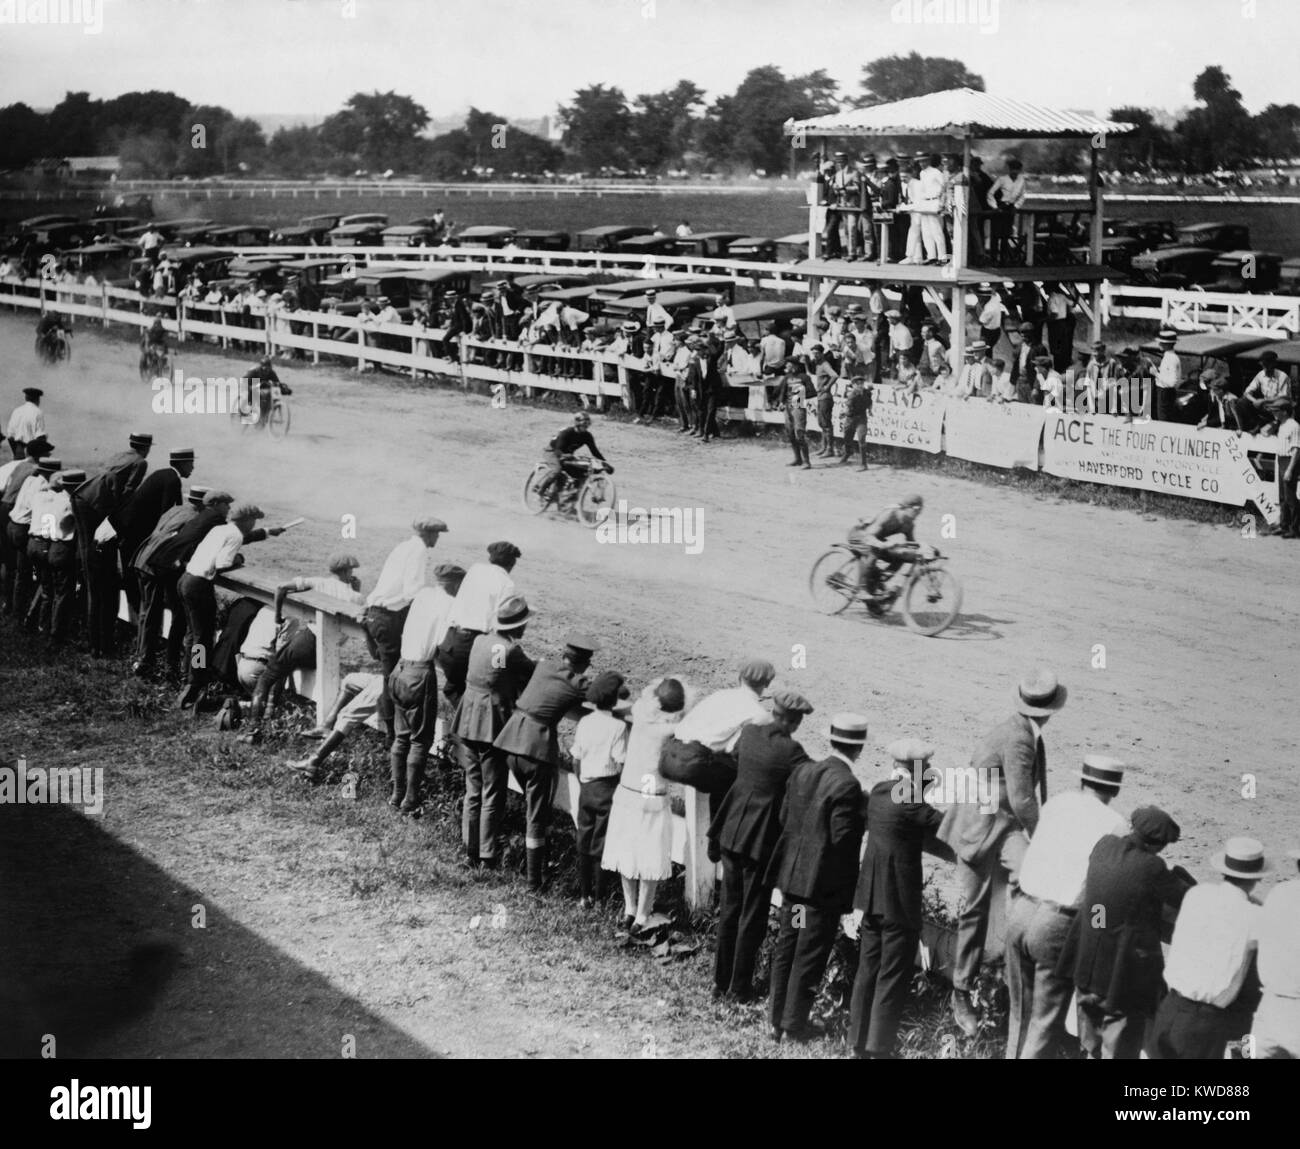 1920s motorcycle race, in the Washington, D.C. area. (BSLOC 2015 17 158) Stock Photo